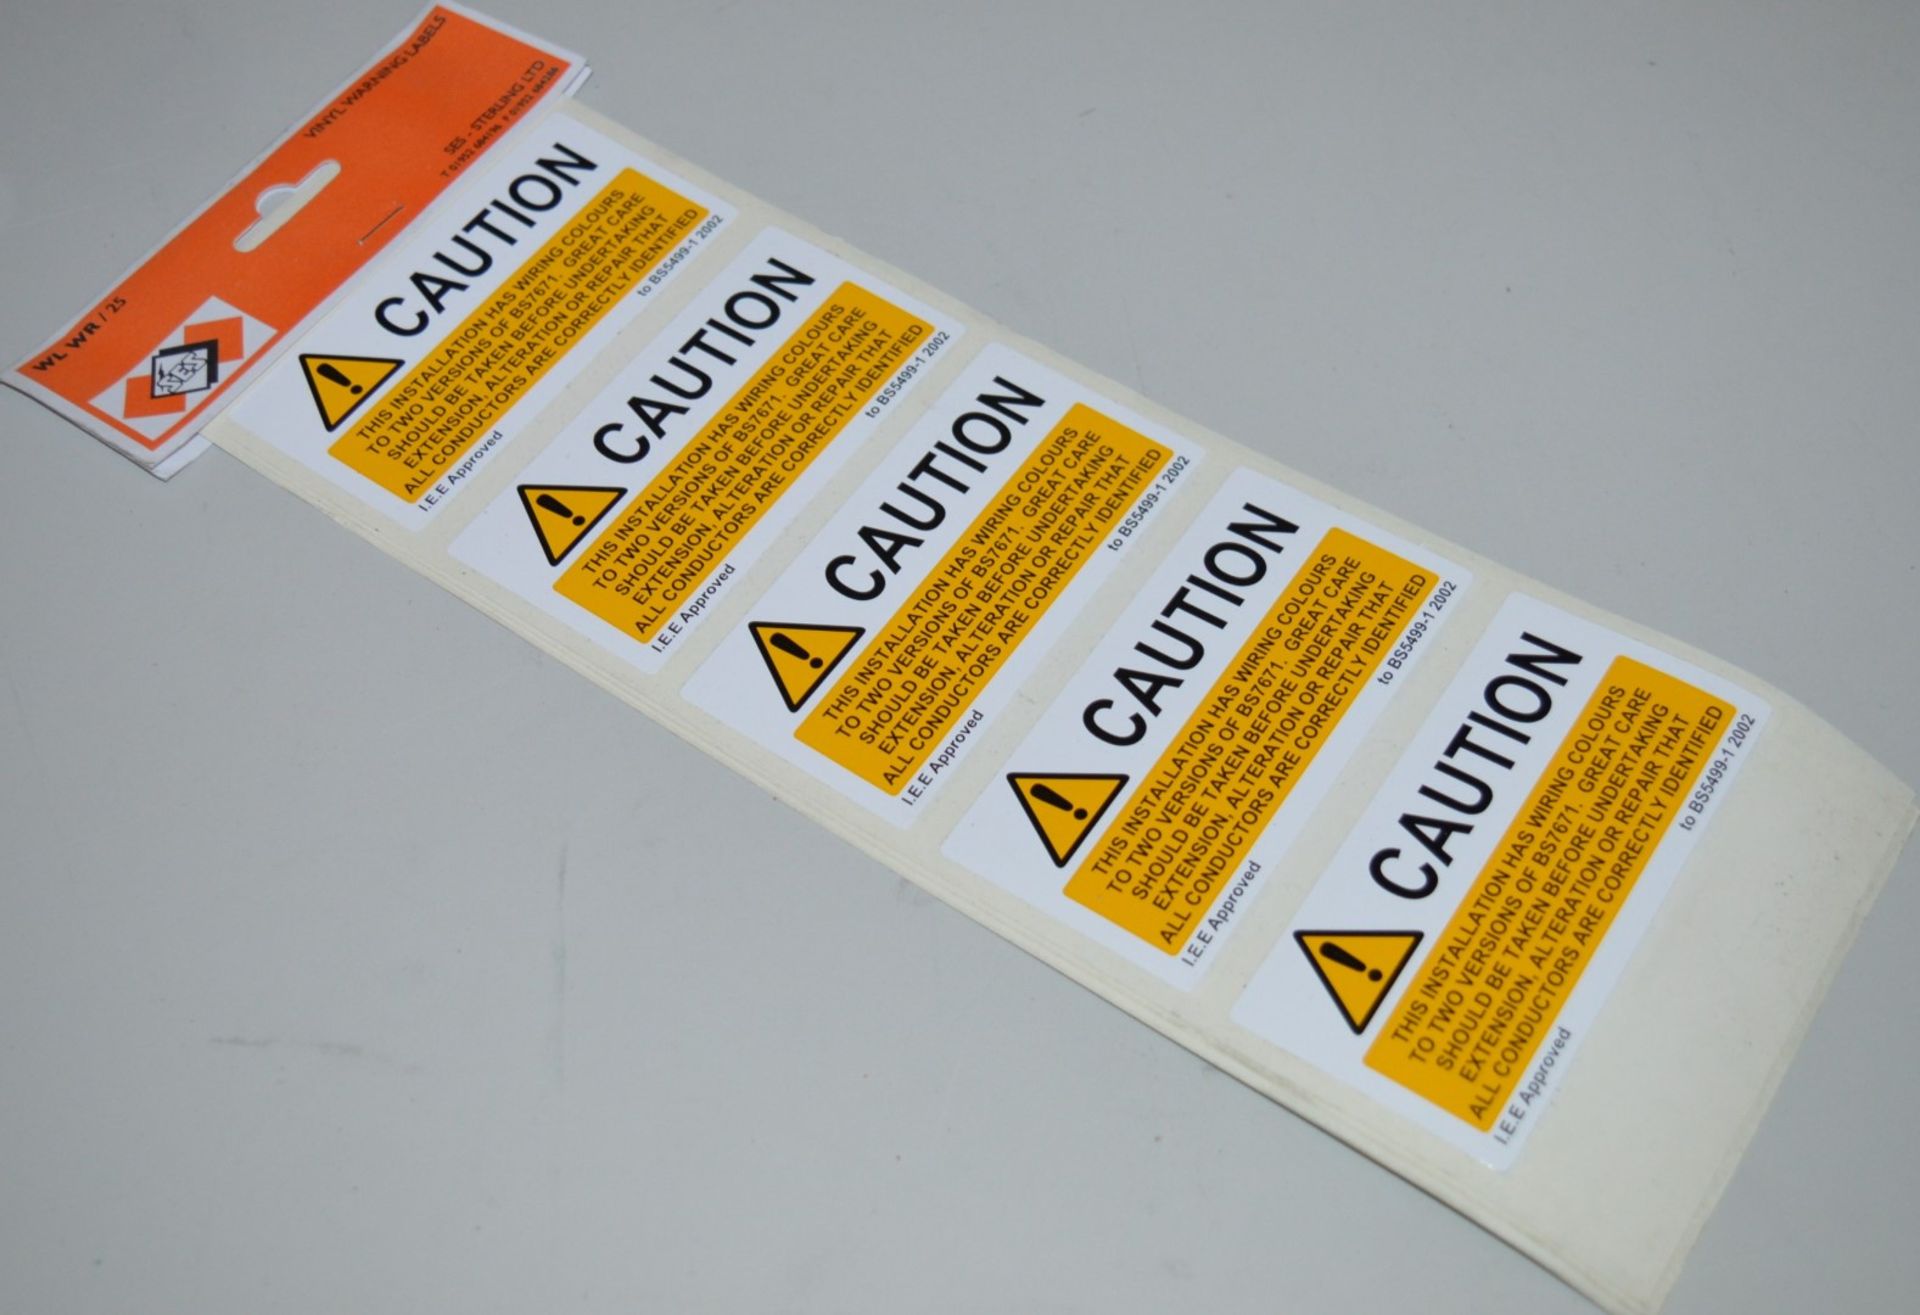 500 x Caution BS7671 Lables - Includes 20 x Packs of x 25 Lables - For Use on Electrical Equipment - Image 2 of 4